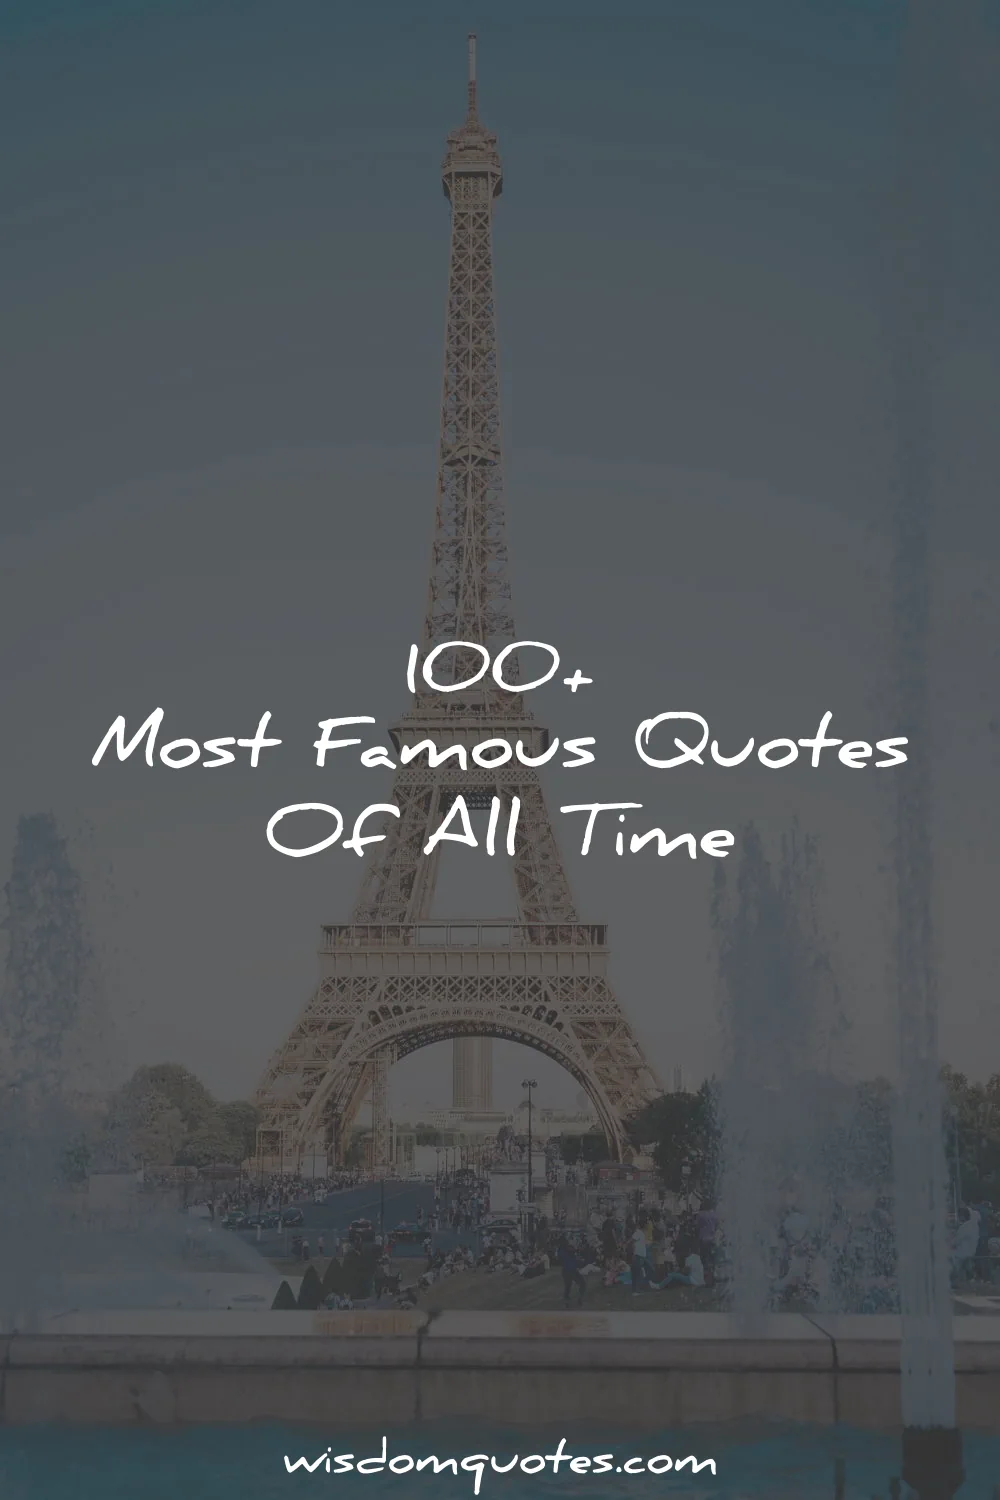 famous quotes of all time pinterest wisdom quotes